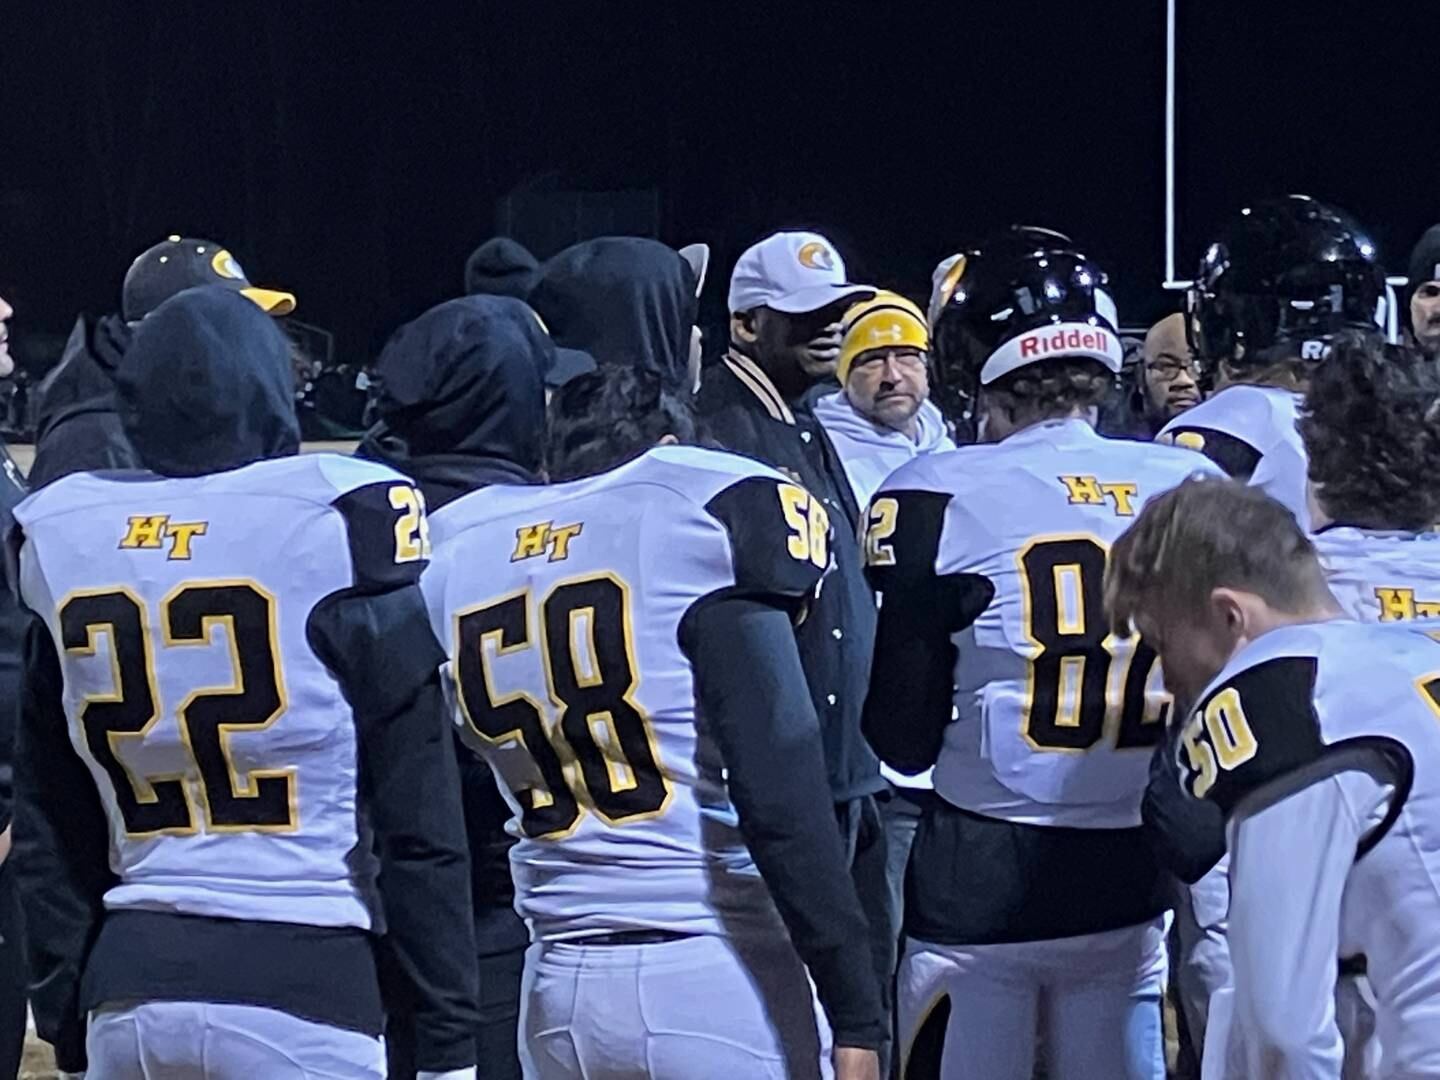 Harford Tech football coach Tim Palmer (center) talks to his team after Friday night's Class 2A/1A state semifinal at Patuxent. The Cobras' late season surge fell short of a first state final as Patuxent won 43-21 in Calvert County.